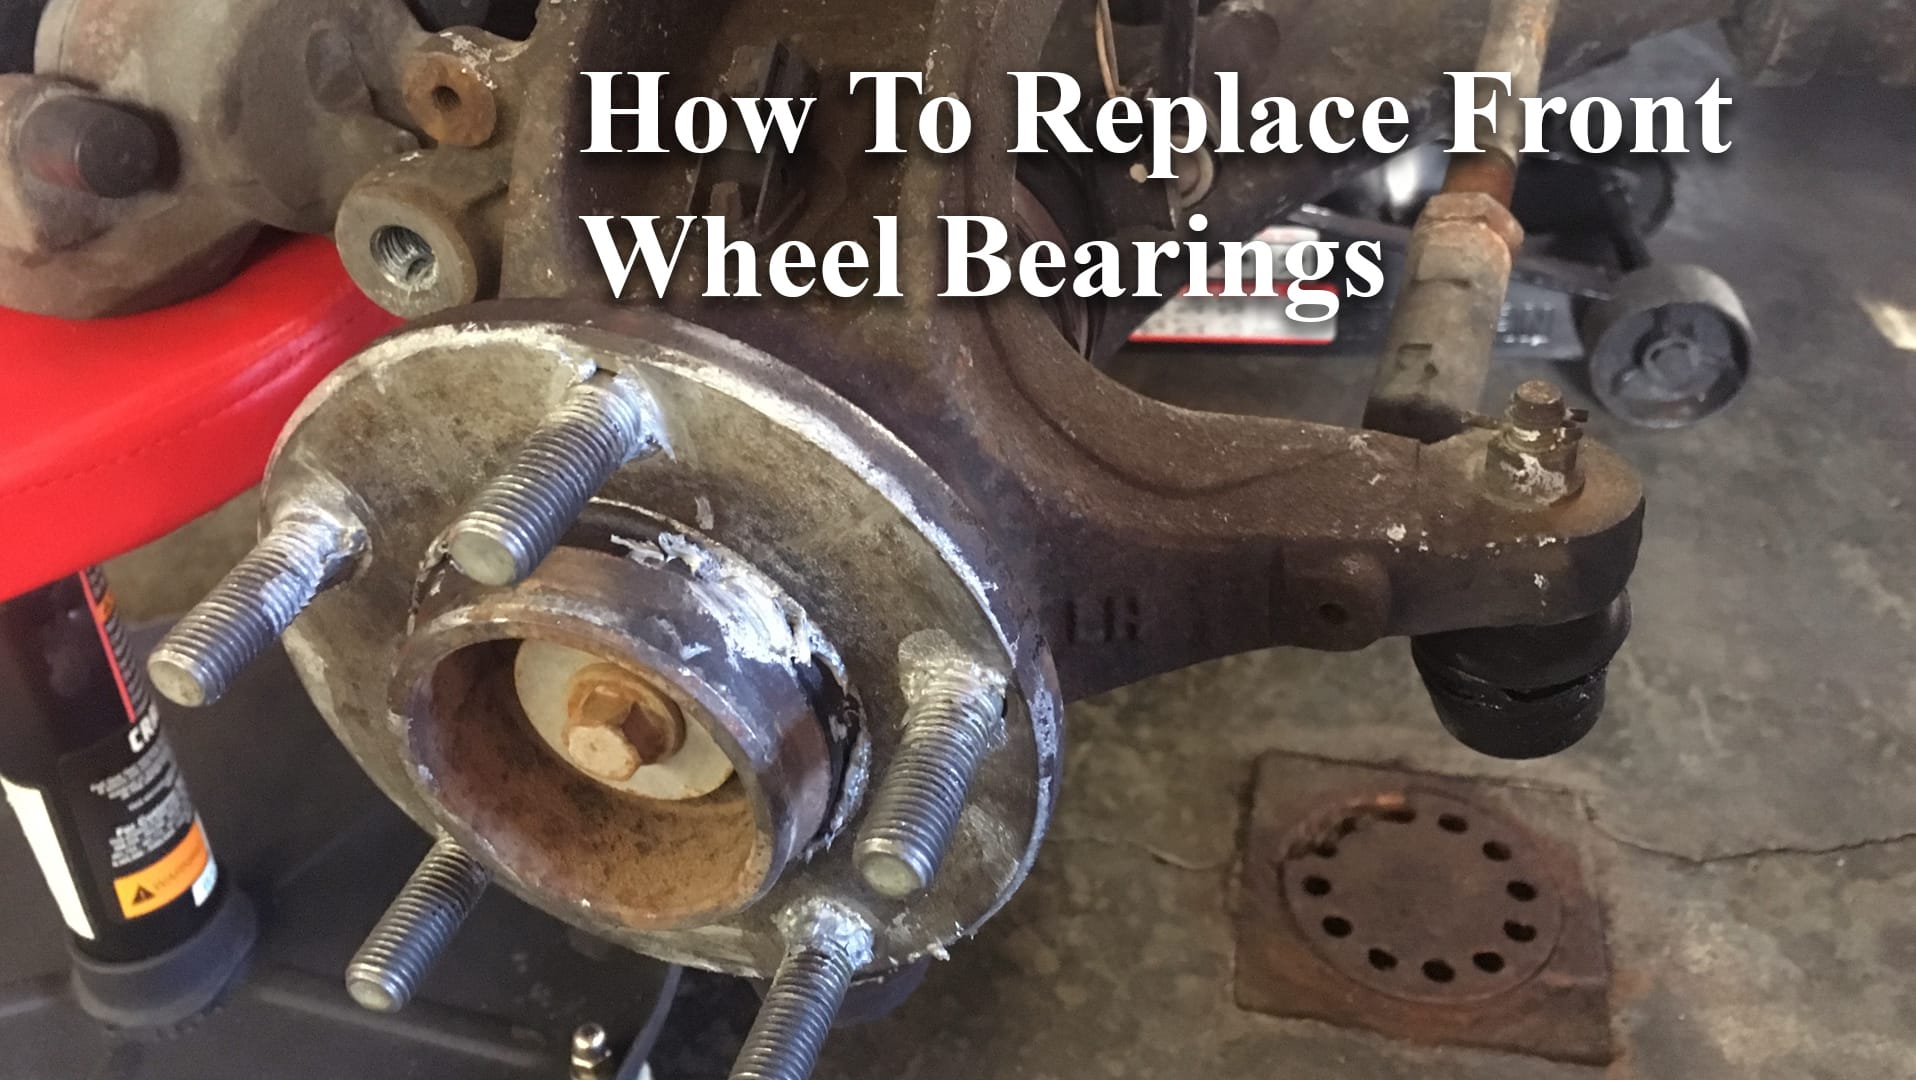 How to replace front wheel bearings 2004 mazda 3